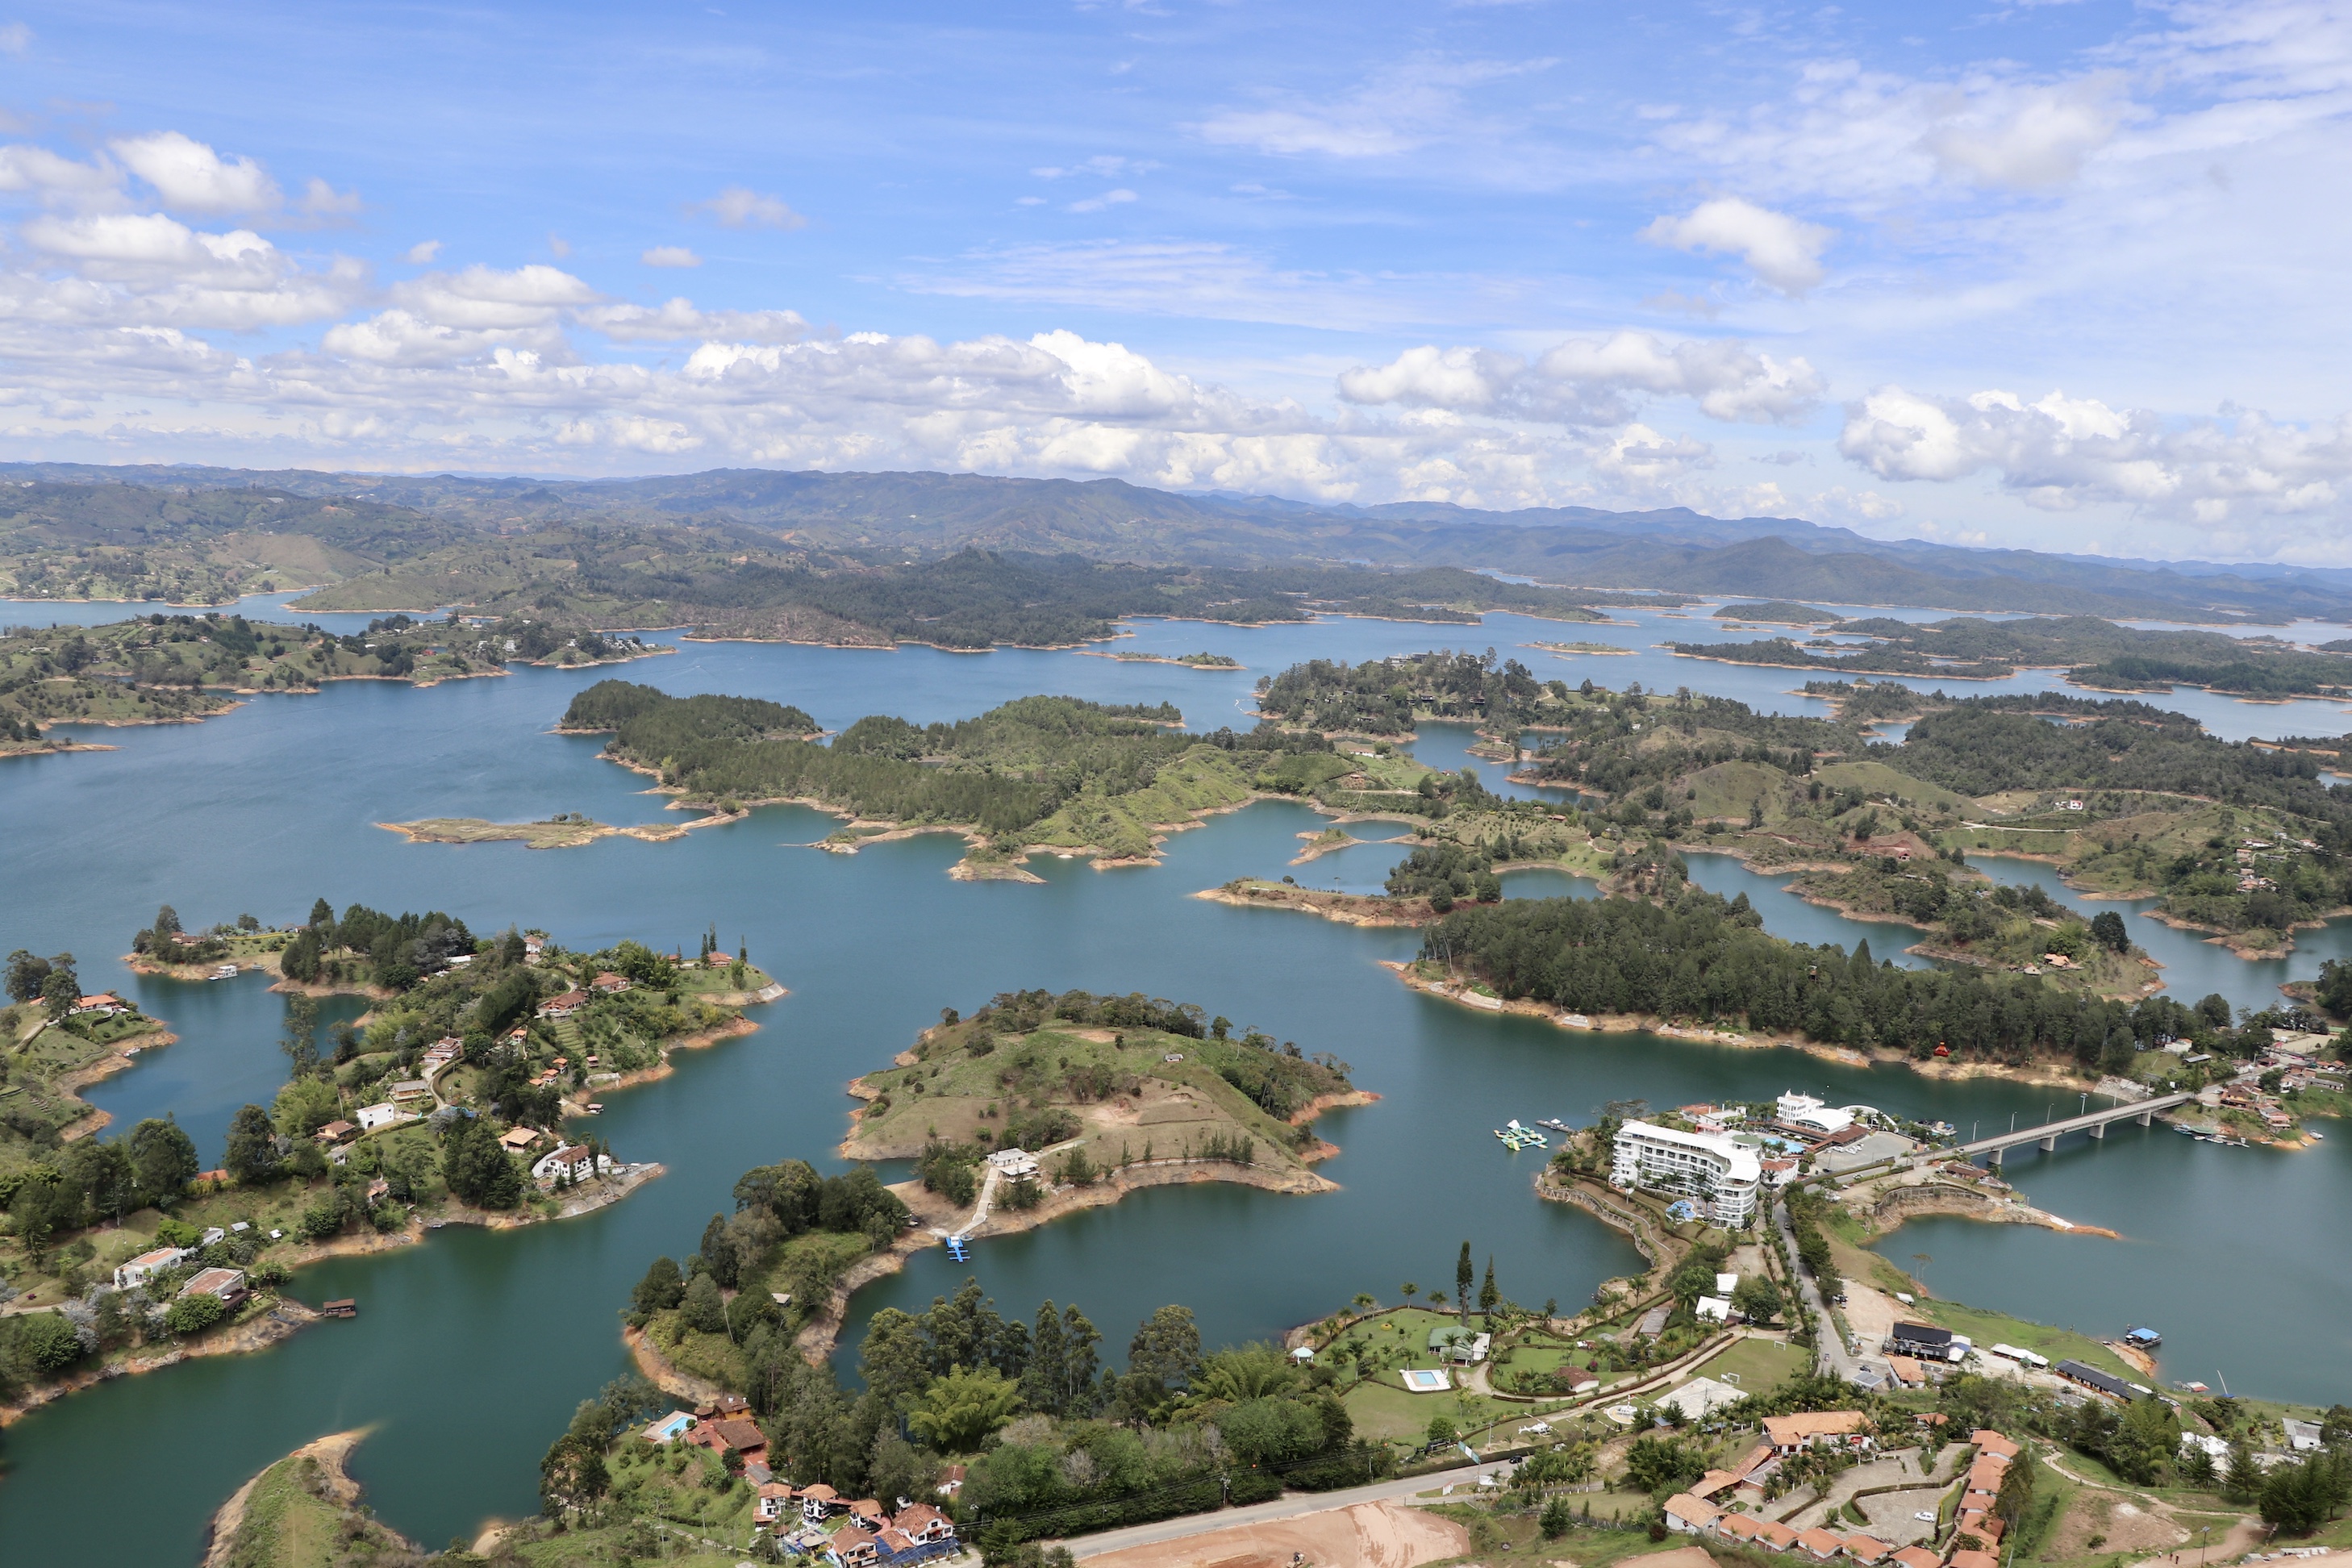 The Piedro del Peñol, a 2135 meter high monolith, provides another opportunity to combine walking with a great view. Around 700 stairs have to be mastered to reach the top but from there you are rewarded with a 360 ° view over the reservoir of Guatapé which creates a collection of islands.